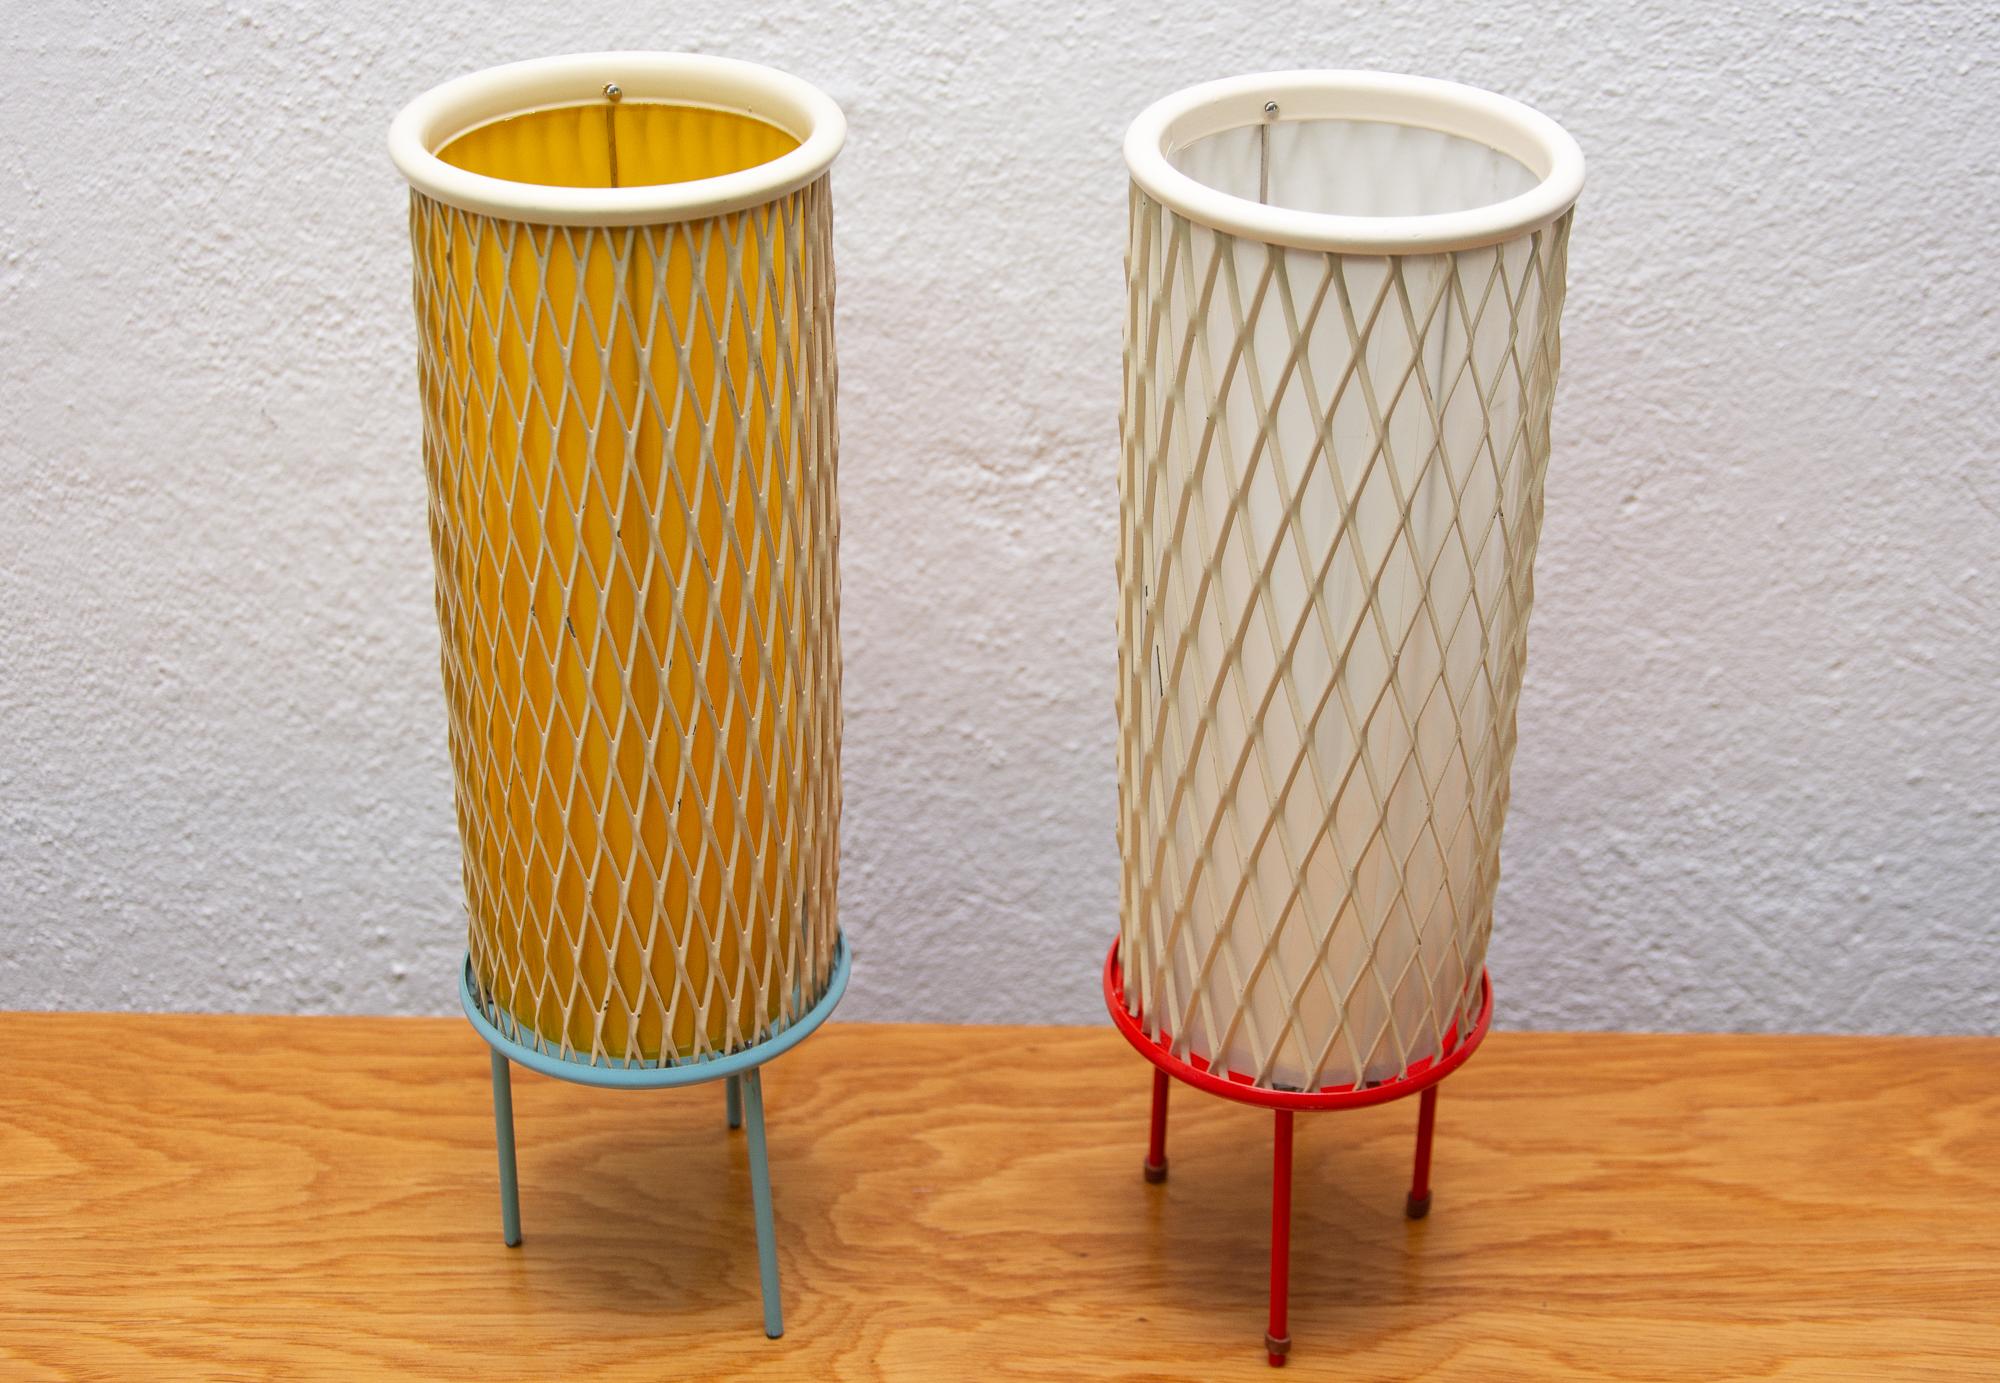 Pair of Midcentury Rocket Table Lamps by Josef Hůrka for Napako, 1960s, Czech 1